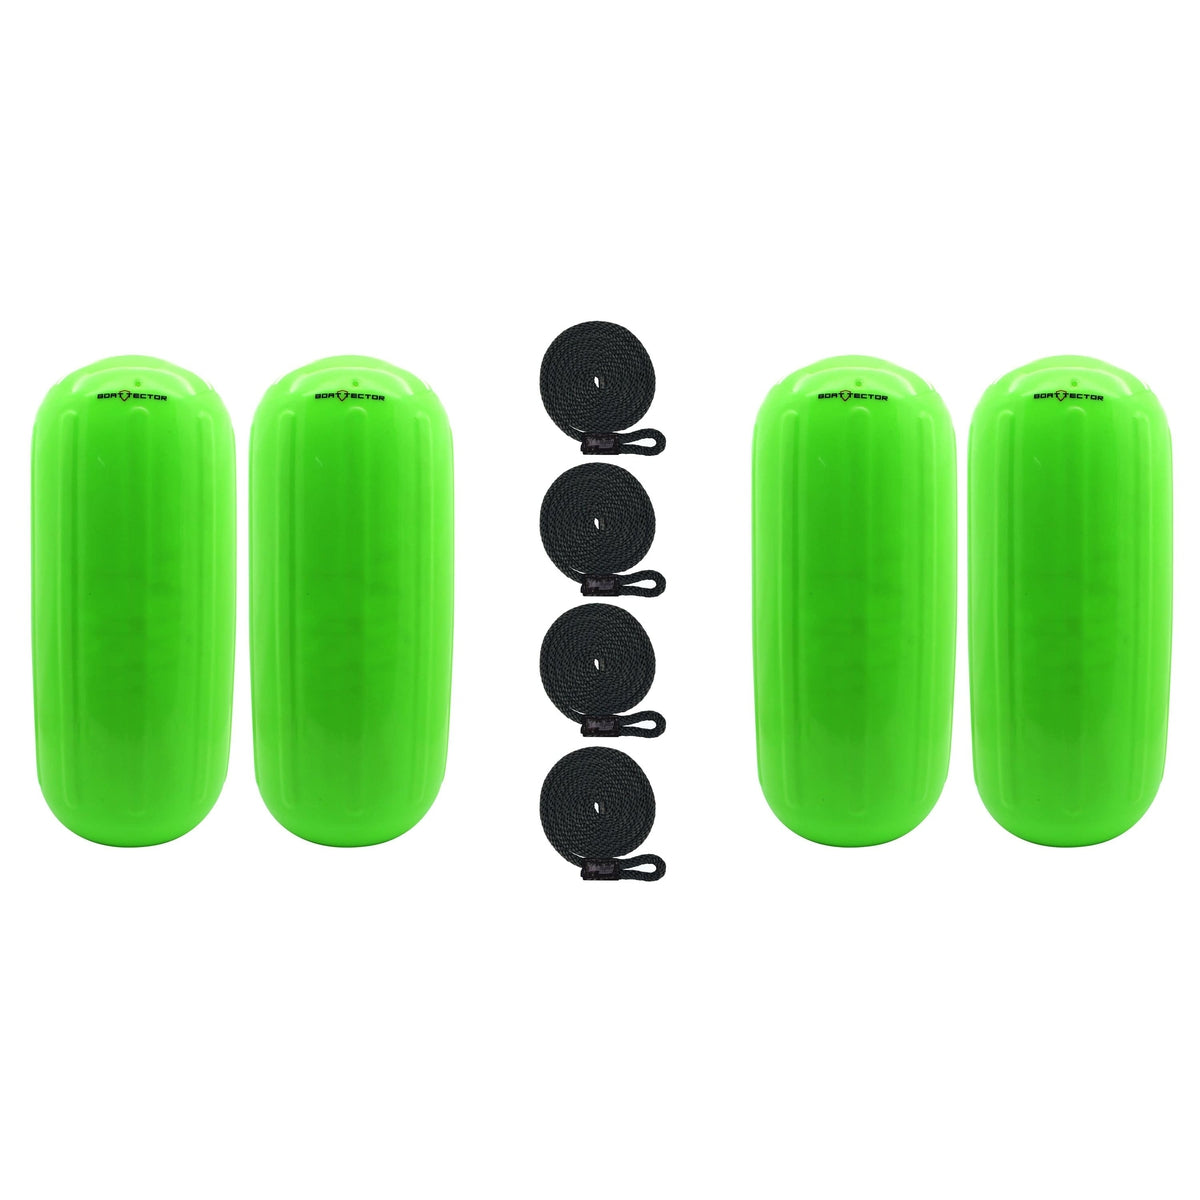 Extreme Max Not Qualified for Free Shipping Extreme Max BoatTector HTM Fender 4-pk 8.5" x 20" Neon Green #3006.7736.4